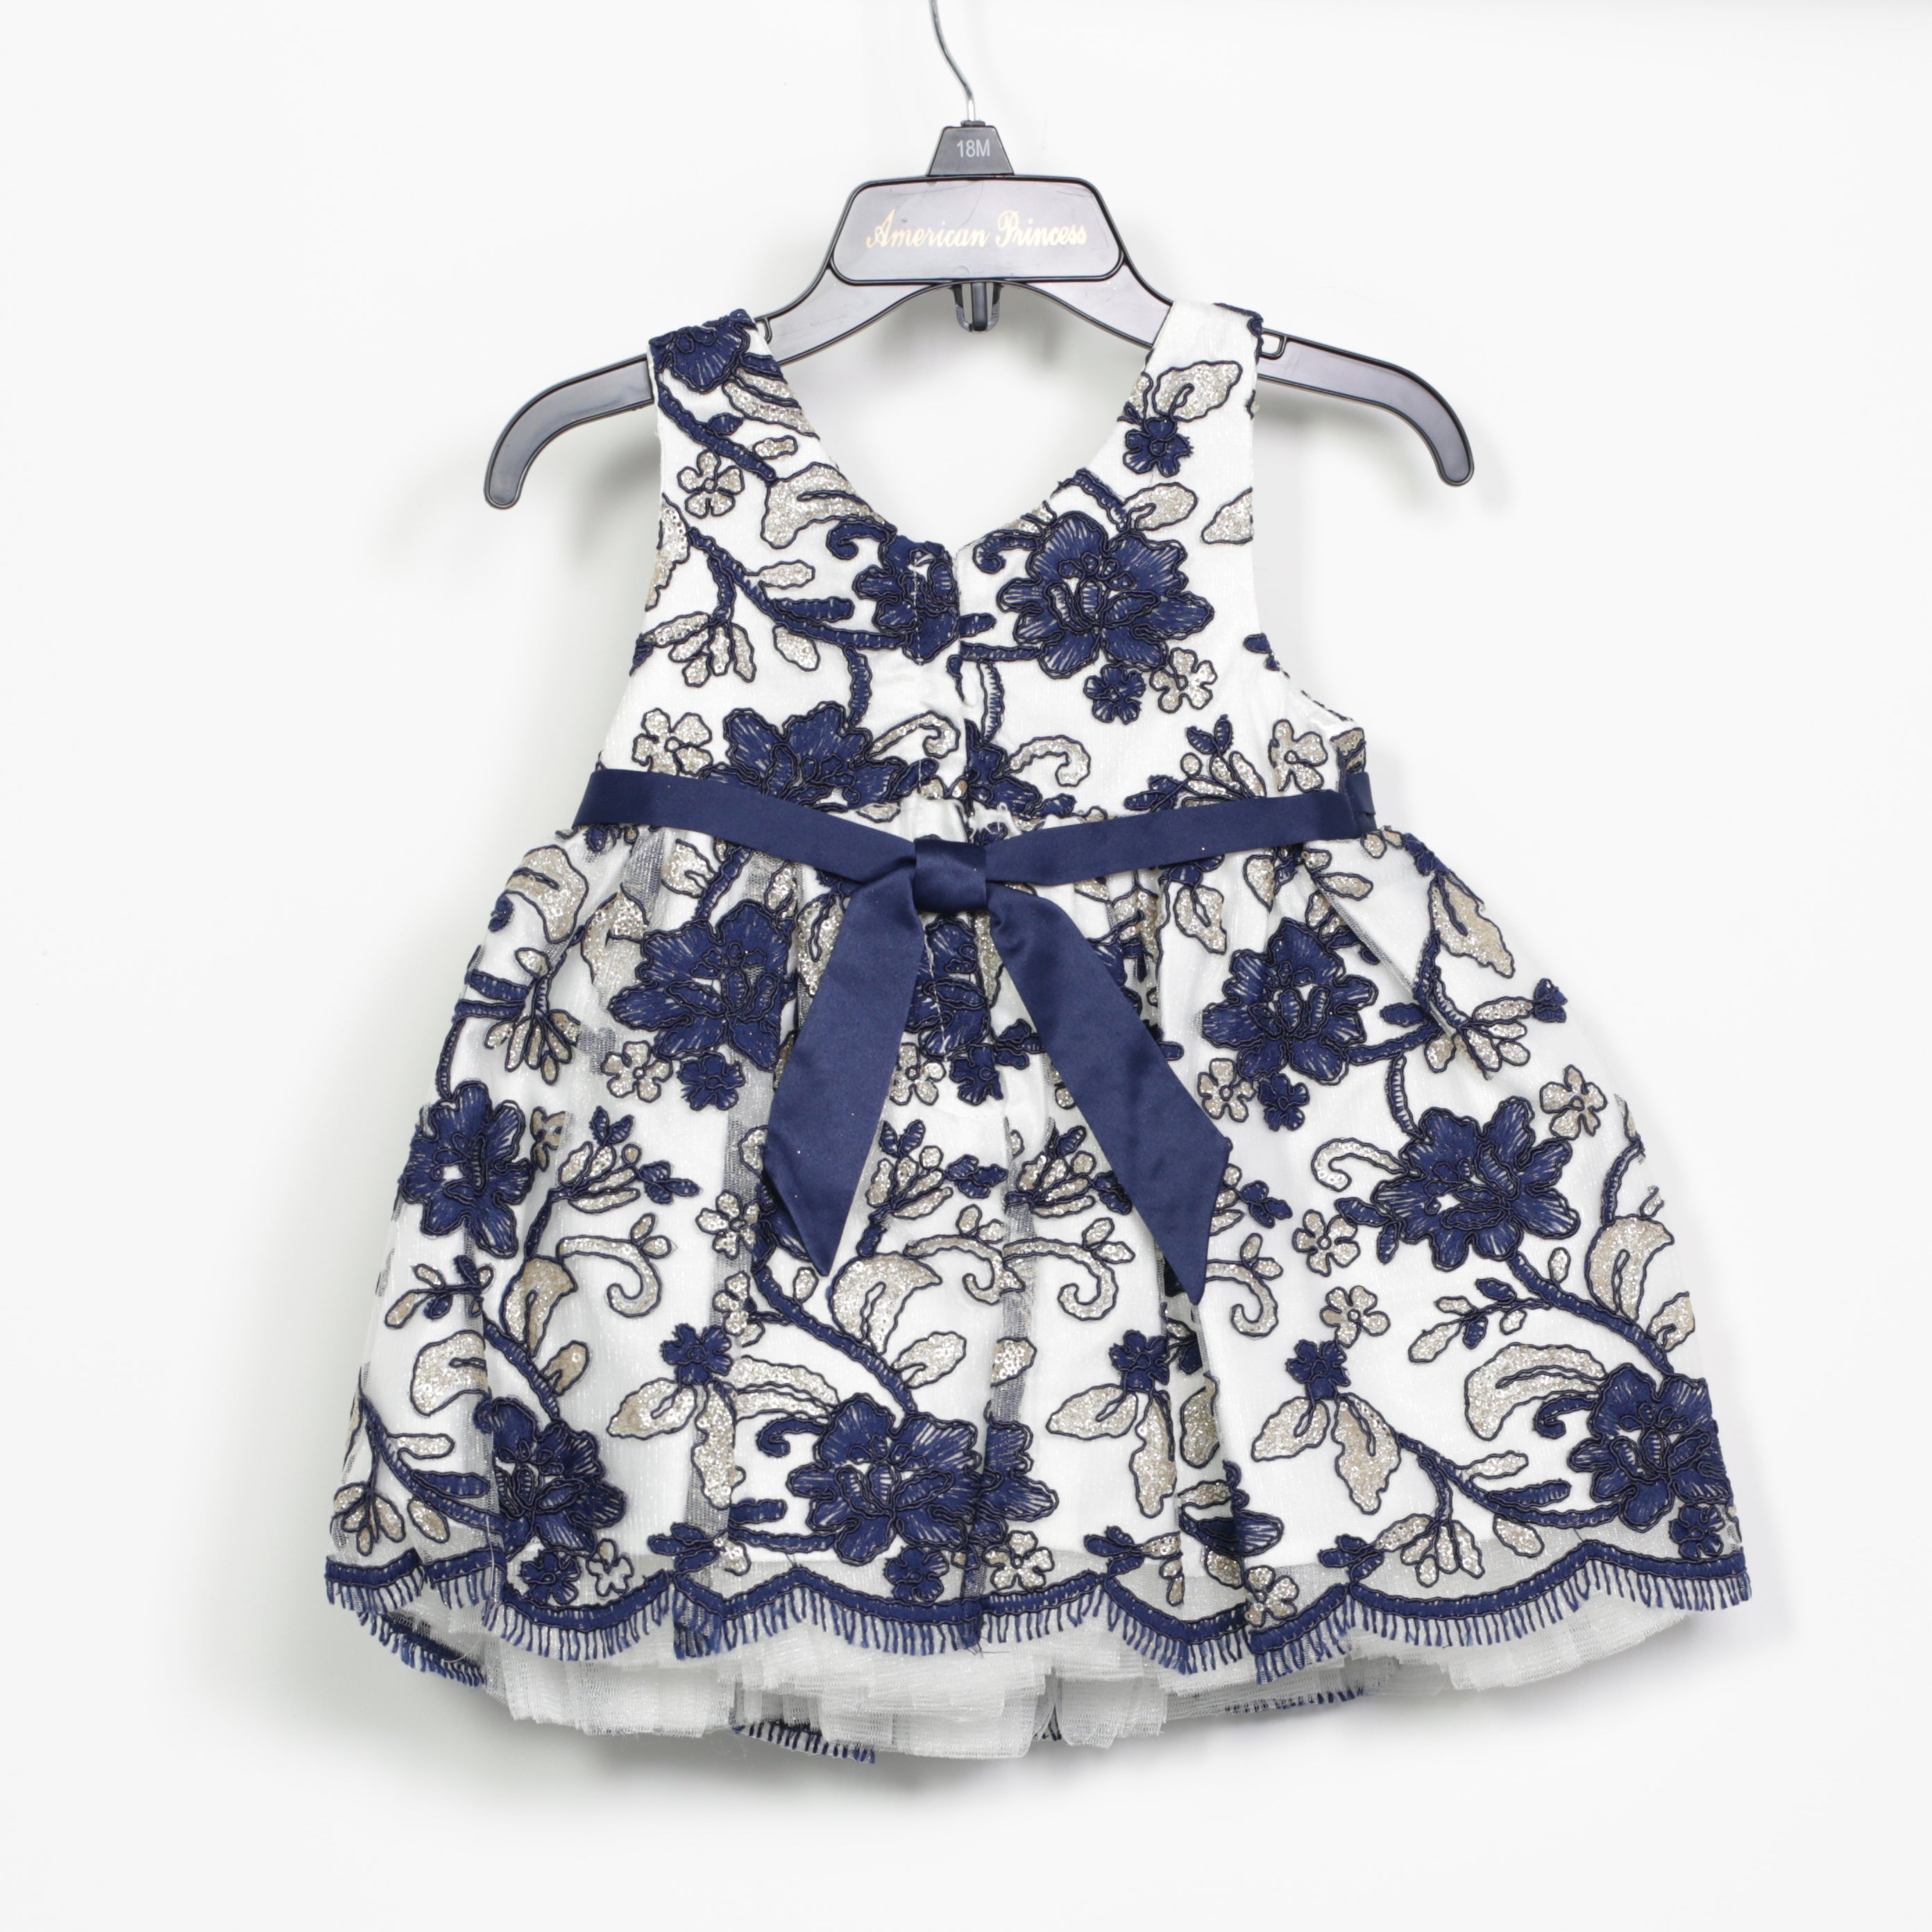 American Princess Dress - Blue Floral with Bow